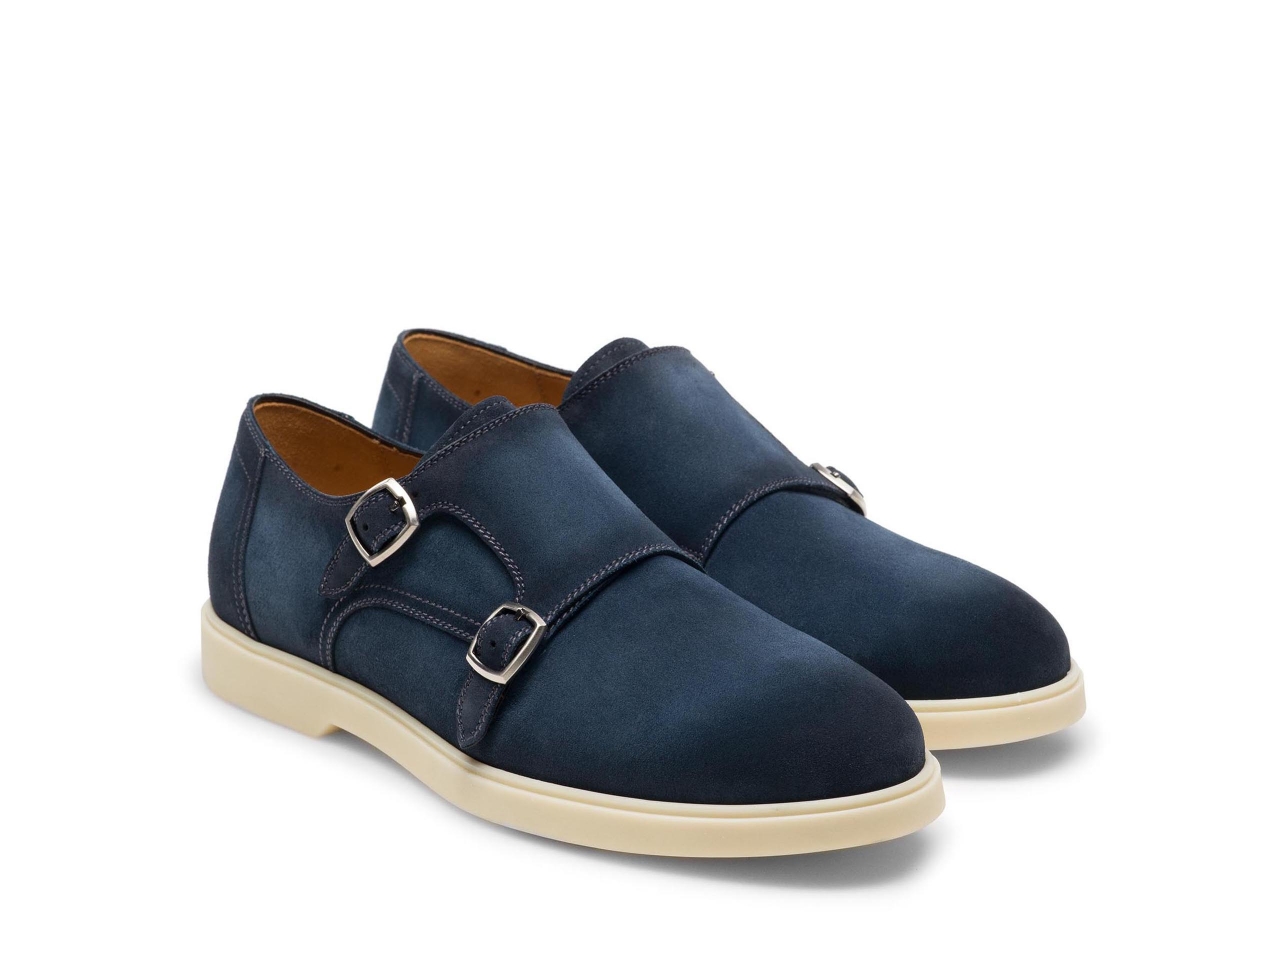 Pair of the Paulo Navy Suede